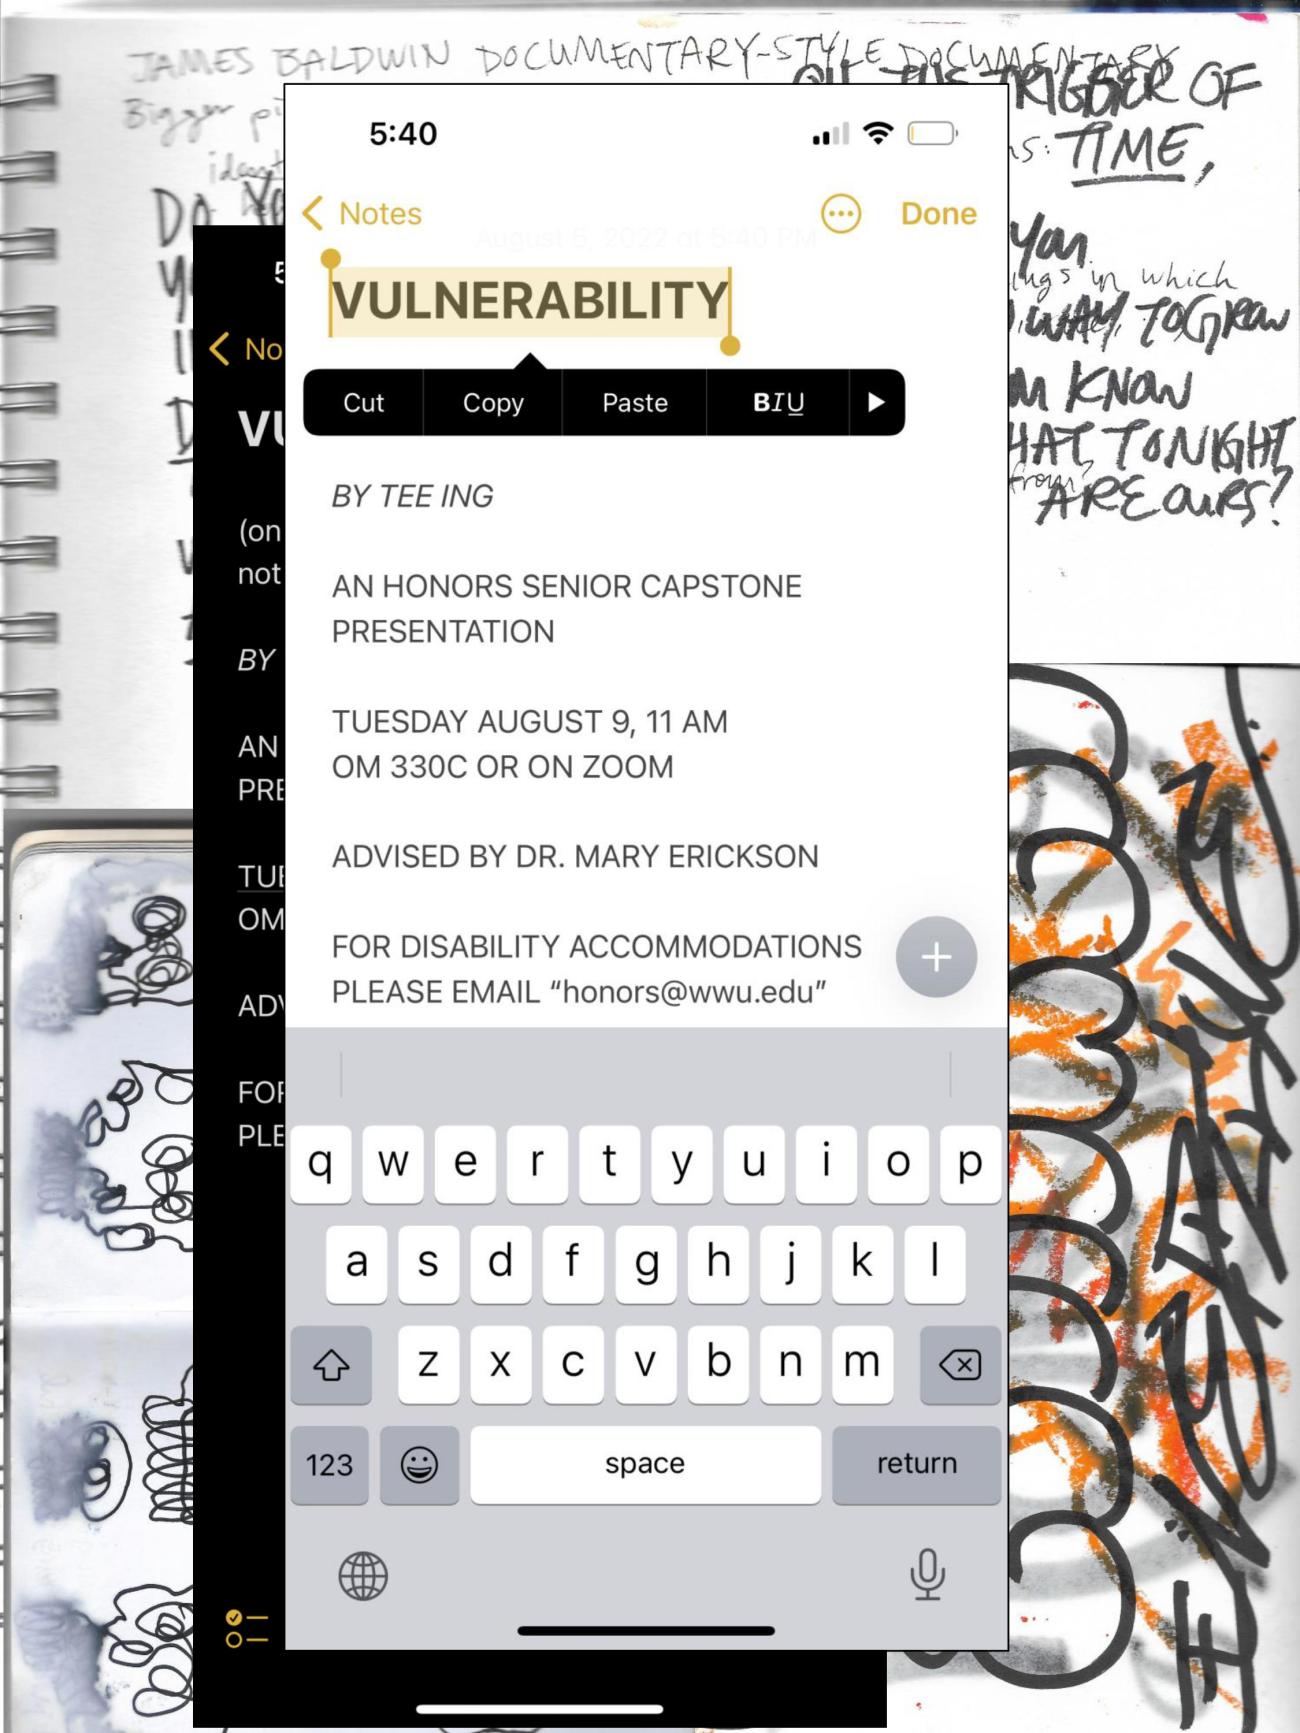 Screenshots of notes app is in the foreground atop stylized photos of art pieces and illegible handwriting in the background. The center screenshot reads: VULNERABILITY, by Tee Ing, an honors senior capstone presentation, Tuesday August 9, 11am, Old Main 330C or on Zoom, advised by Dr. Mary Erickson, for disability accommodations please email honors@wwu.edu.